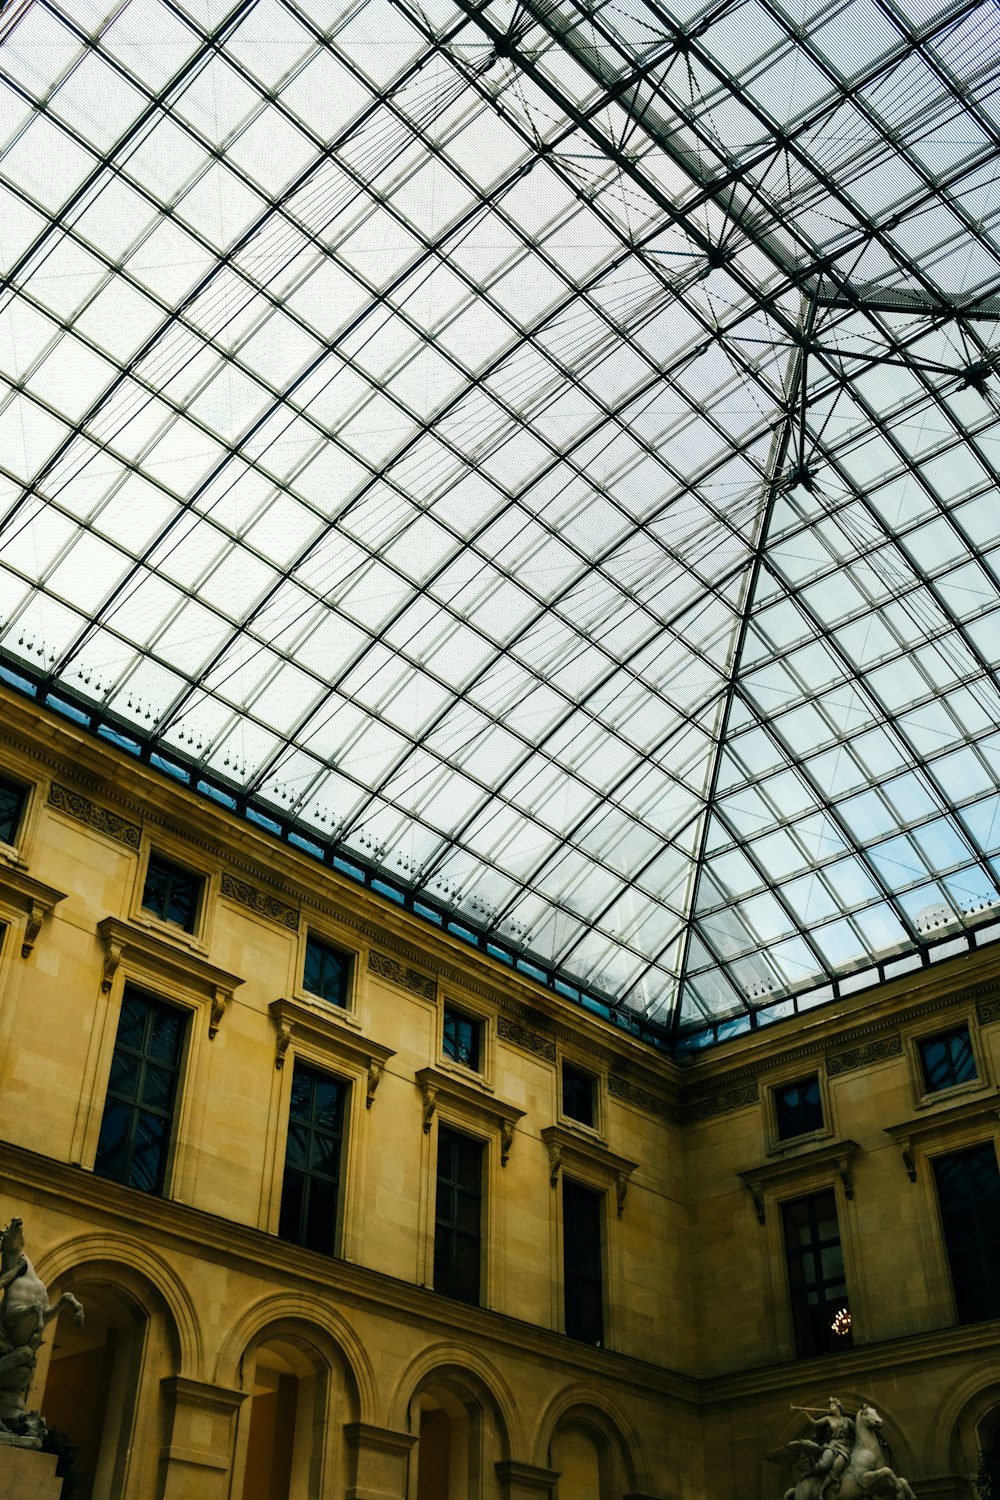 a glass ceiling in a building with statues